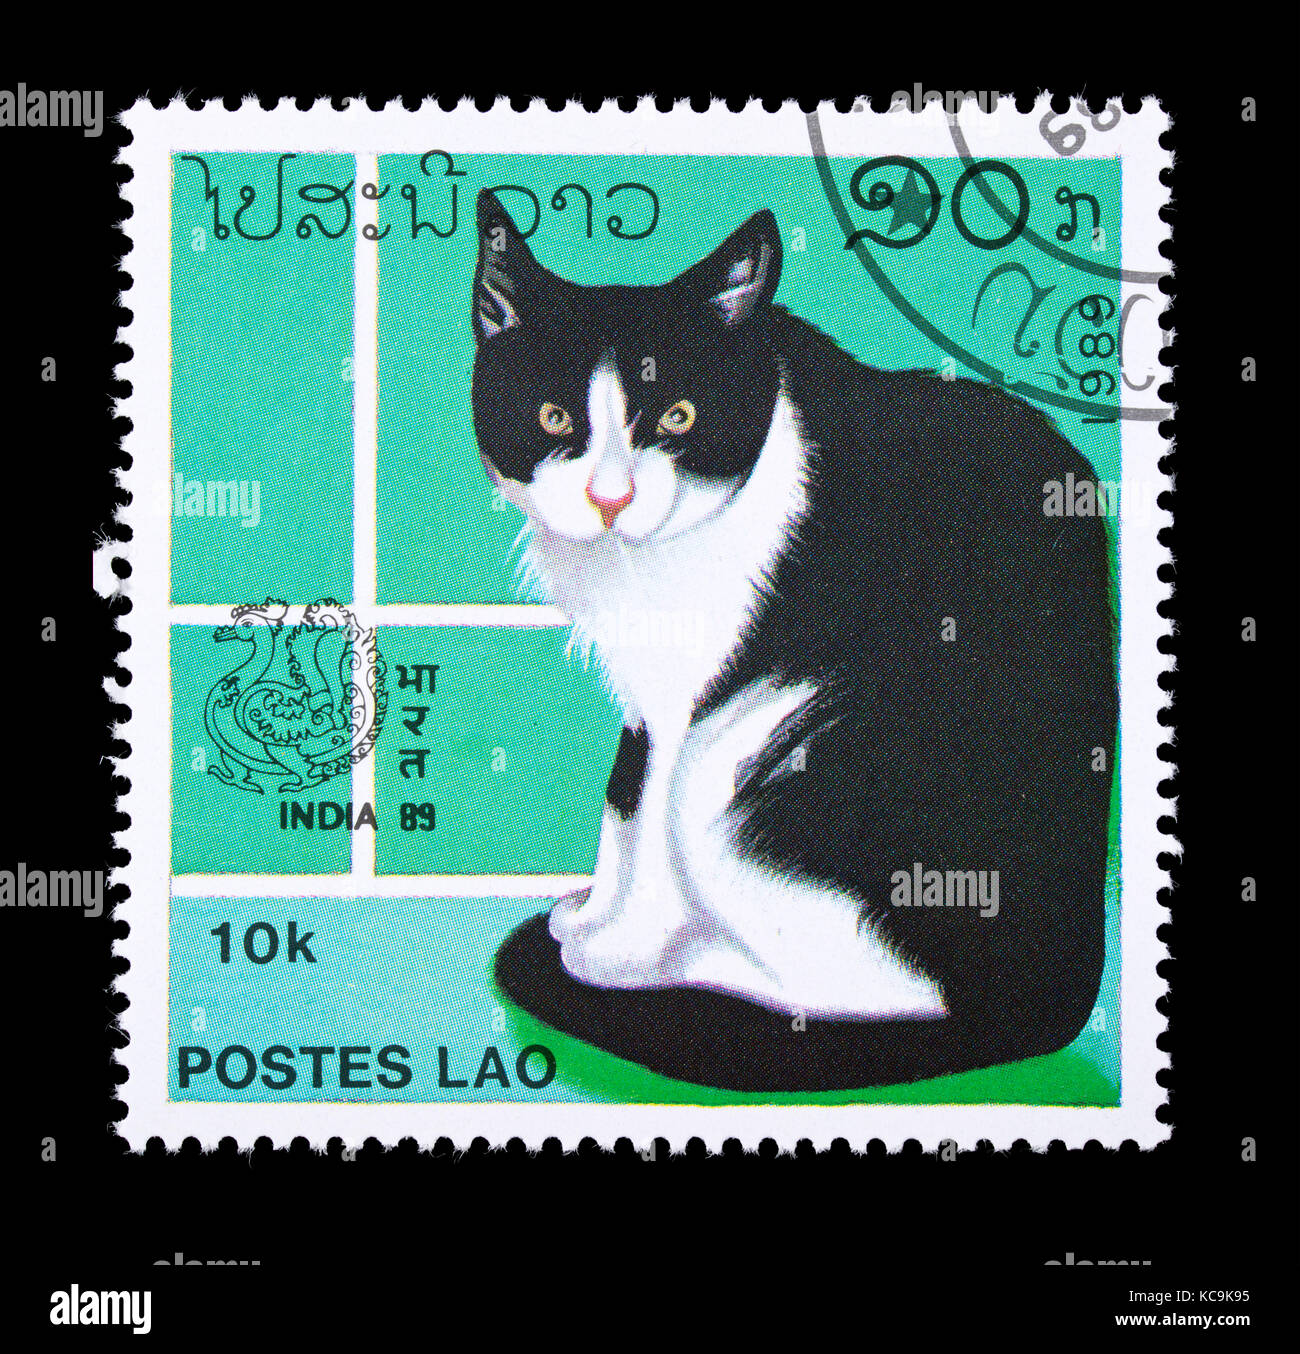 Postage stamp from Laos depicting a house cat. Stock Photo